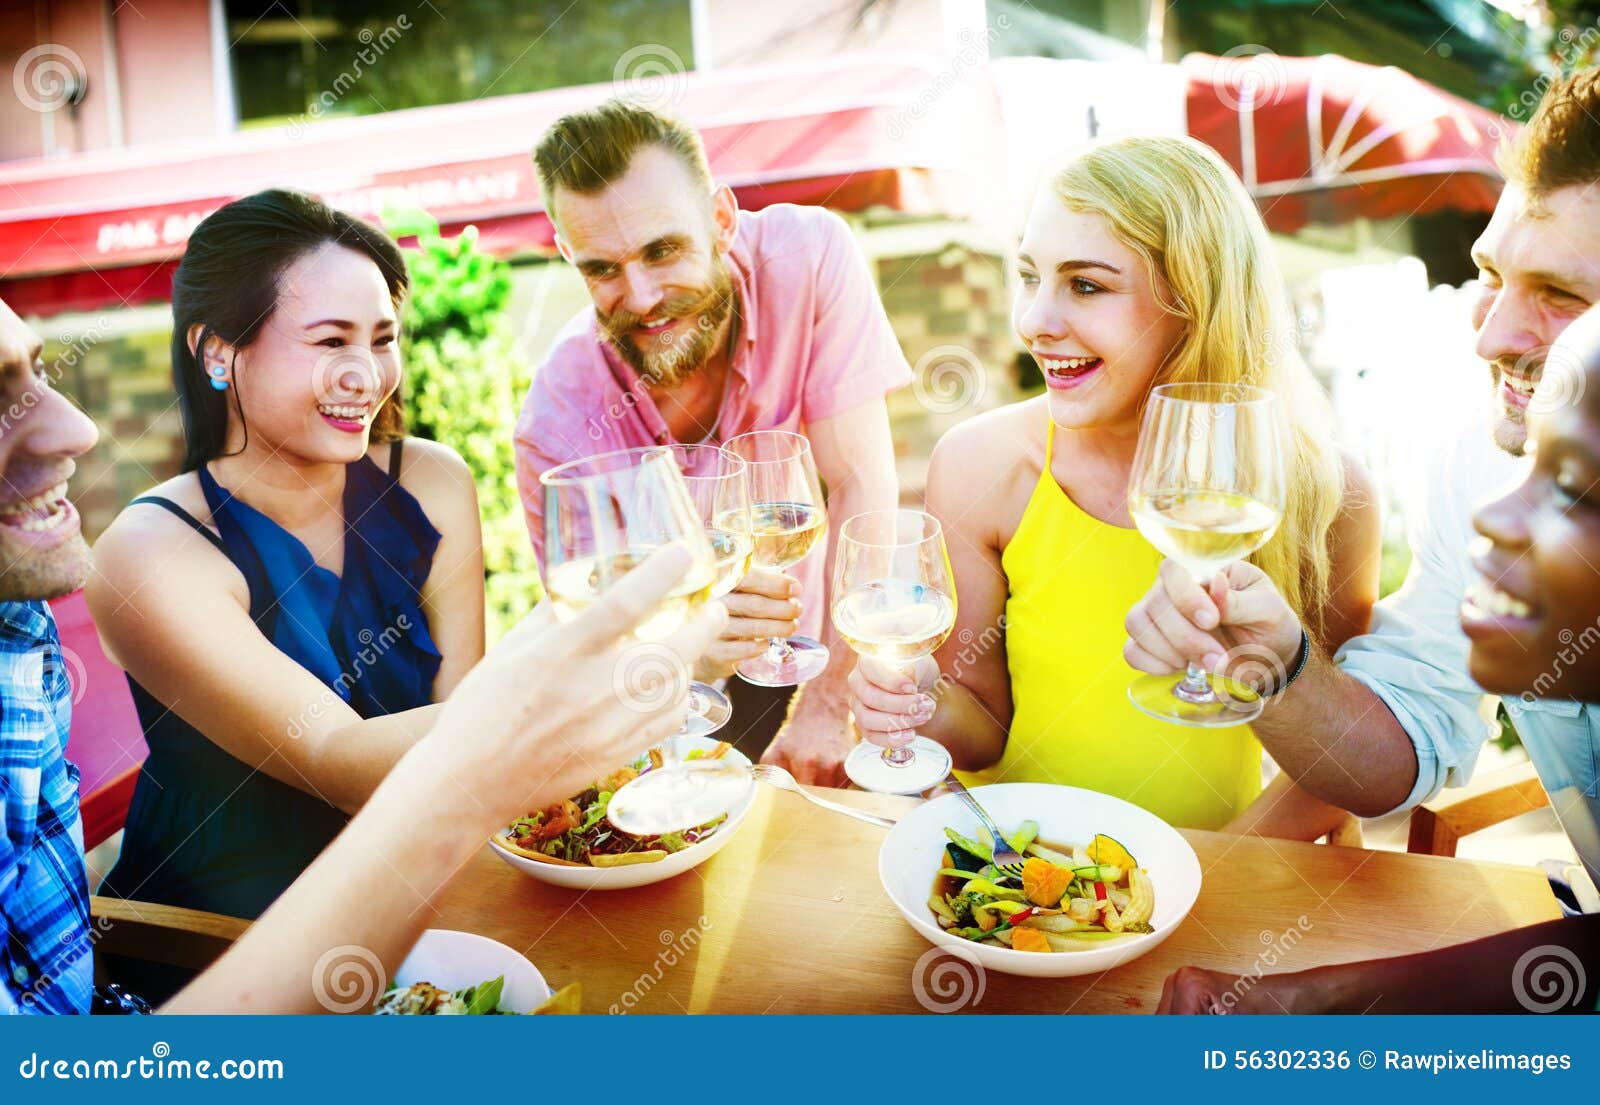 diverse people luncheon outdoors food concept